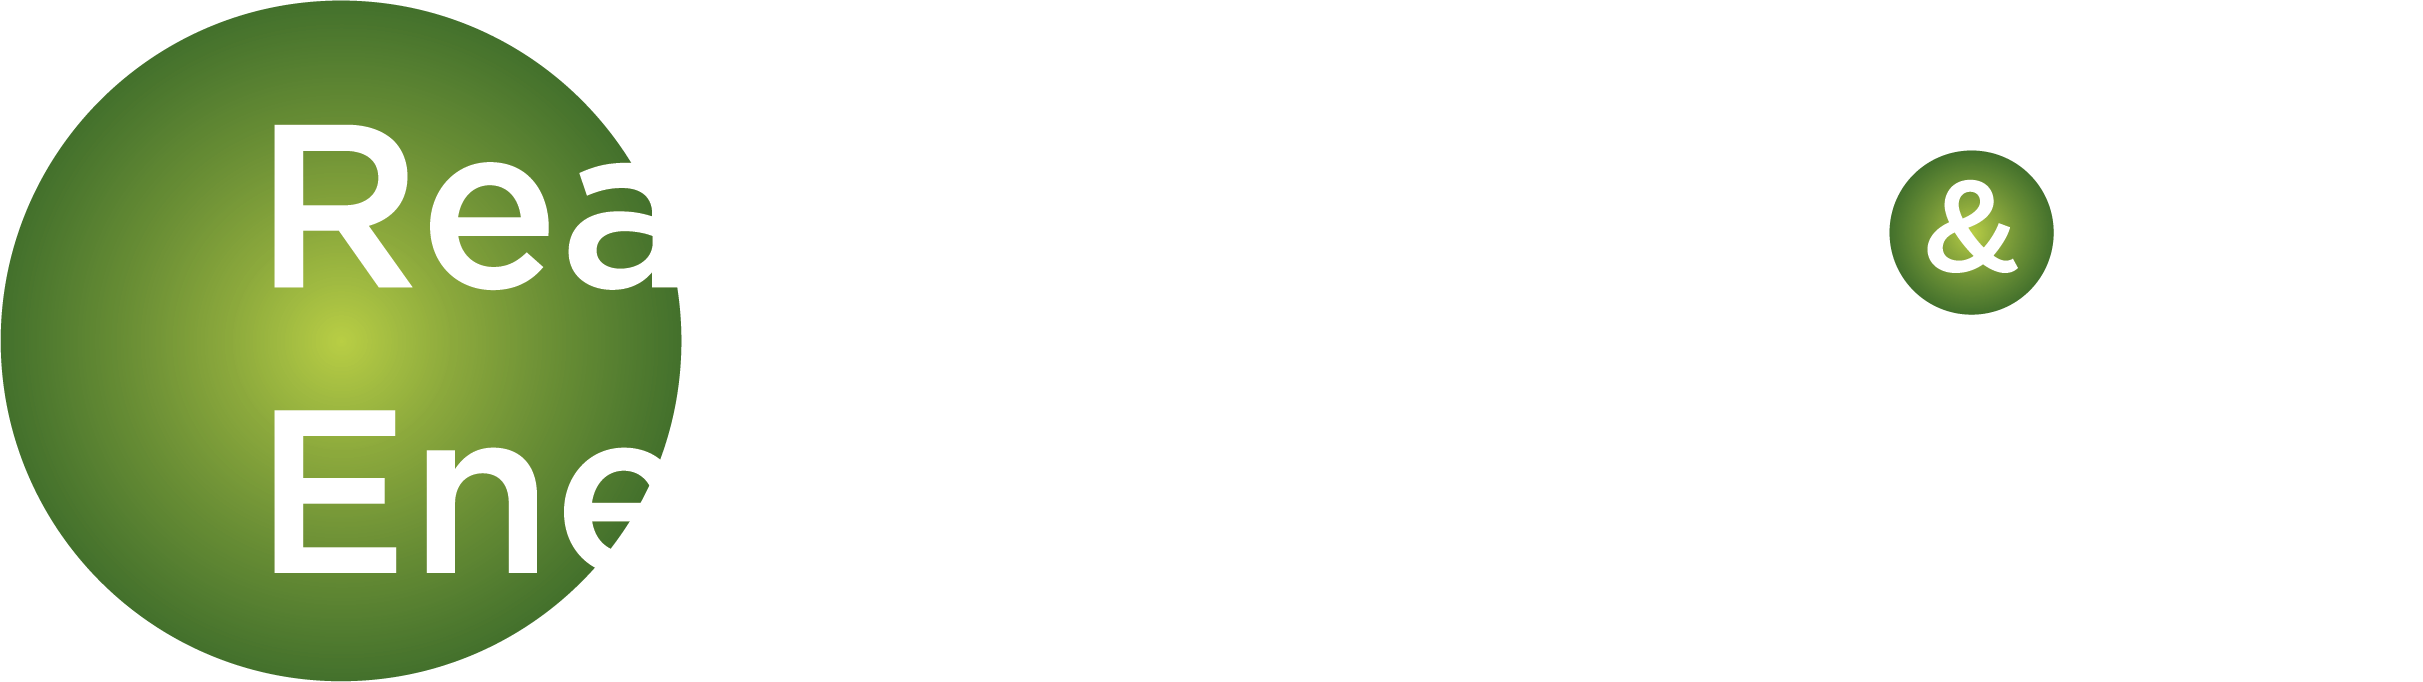 Real Property & Energy Solutions LLC